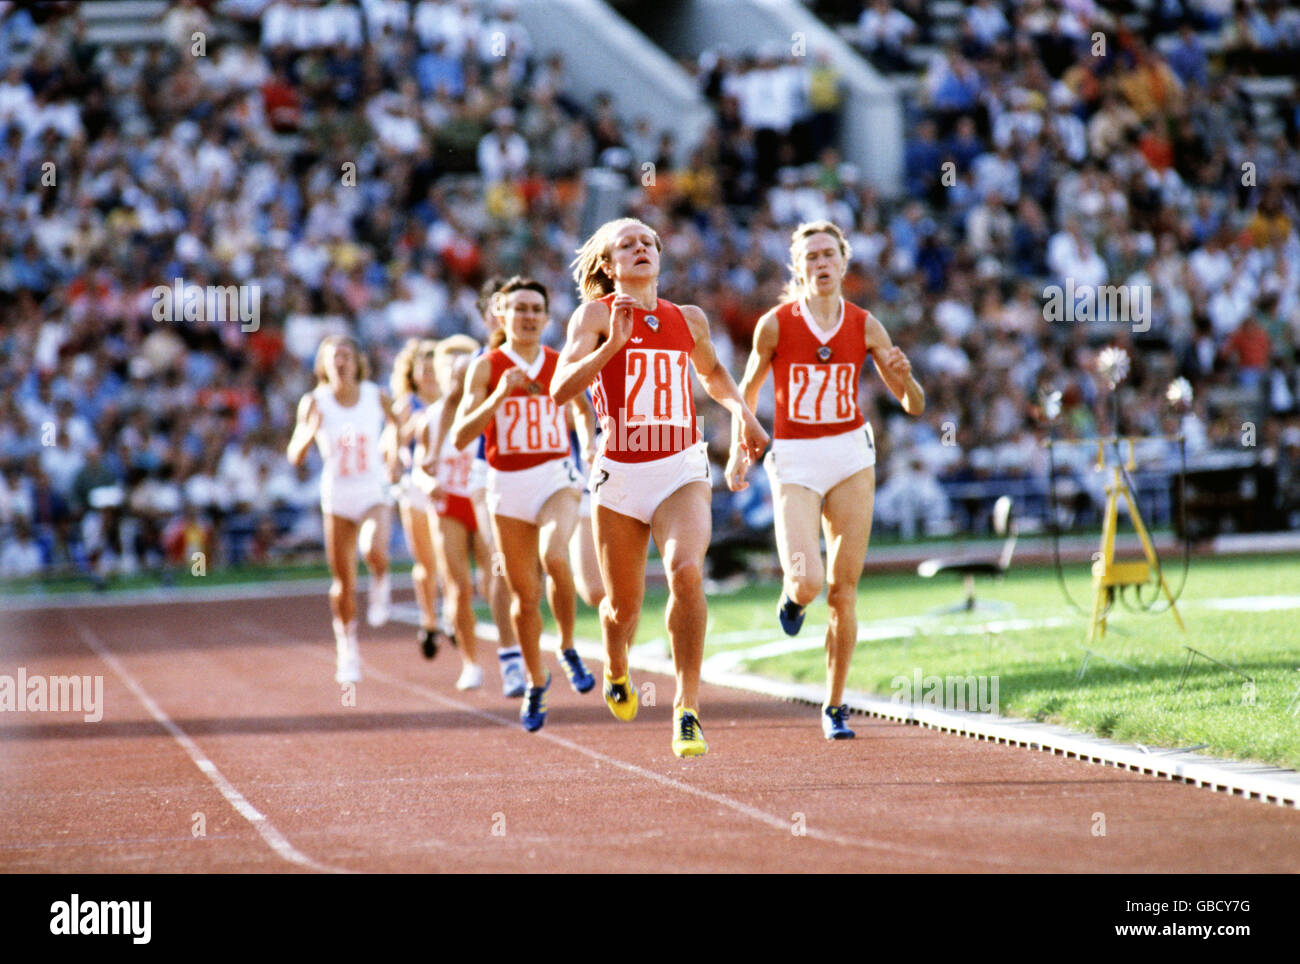 Athletics - Moscow Olympic Games 1980 - Women's 800m Final. USSR's Nadyezda Olizarenko (281) sprints to gold in a new world record time of 1min 53.43secs Stock Photo